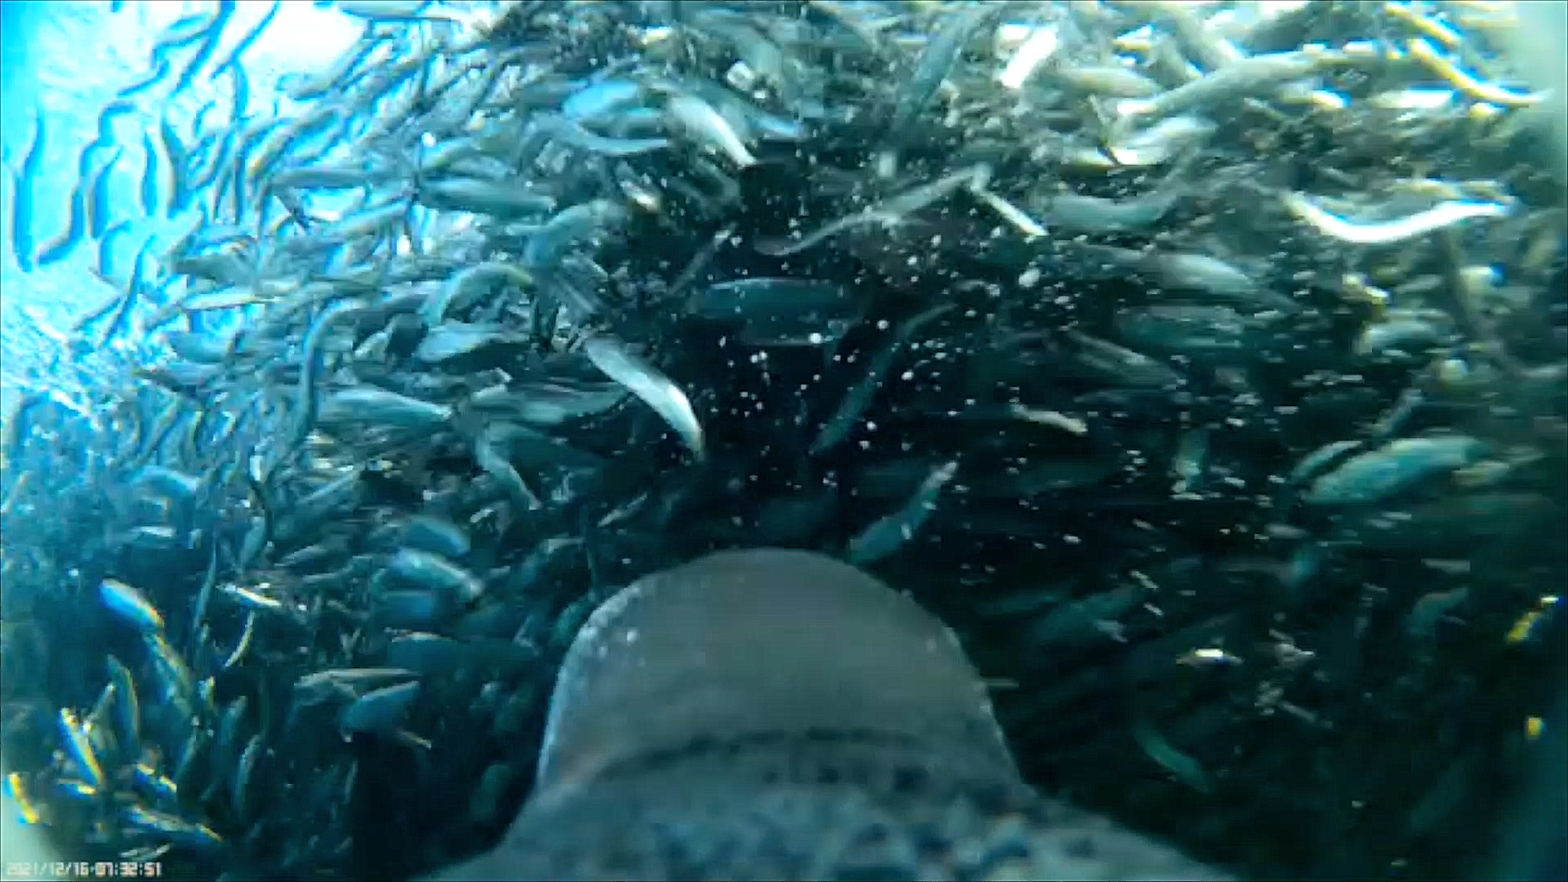 A view of the penguin charging through a shoal of sardines while feeding.  (Image: WCS)